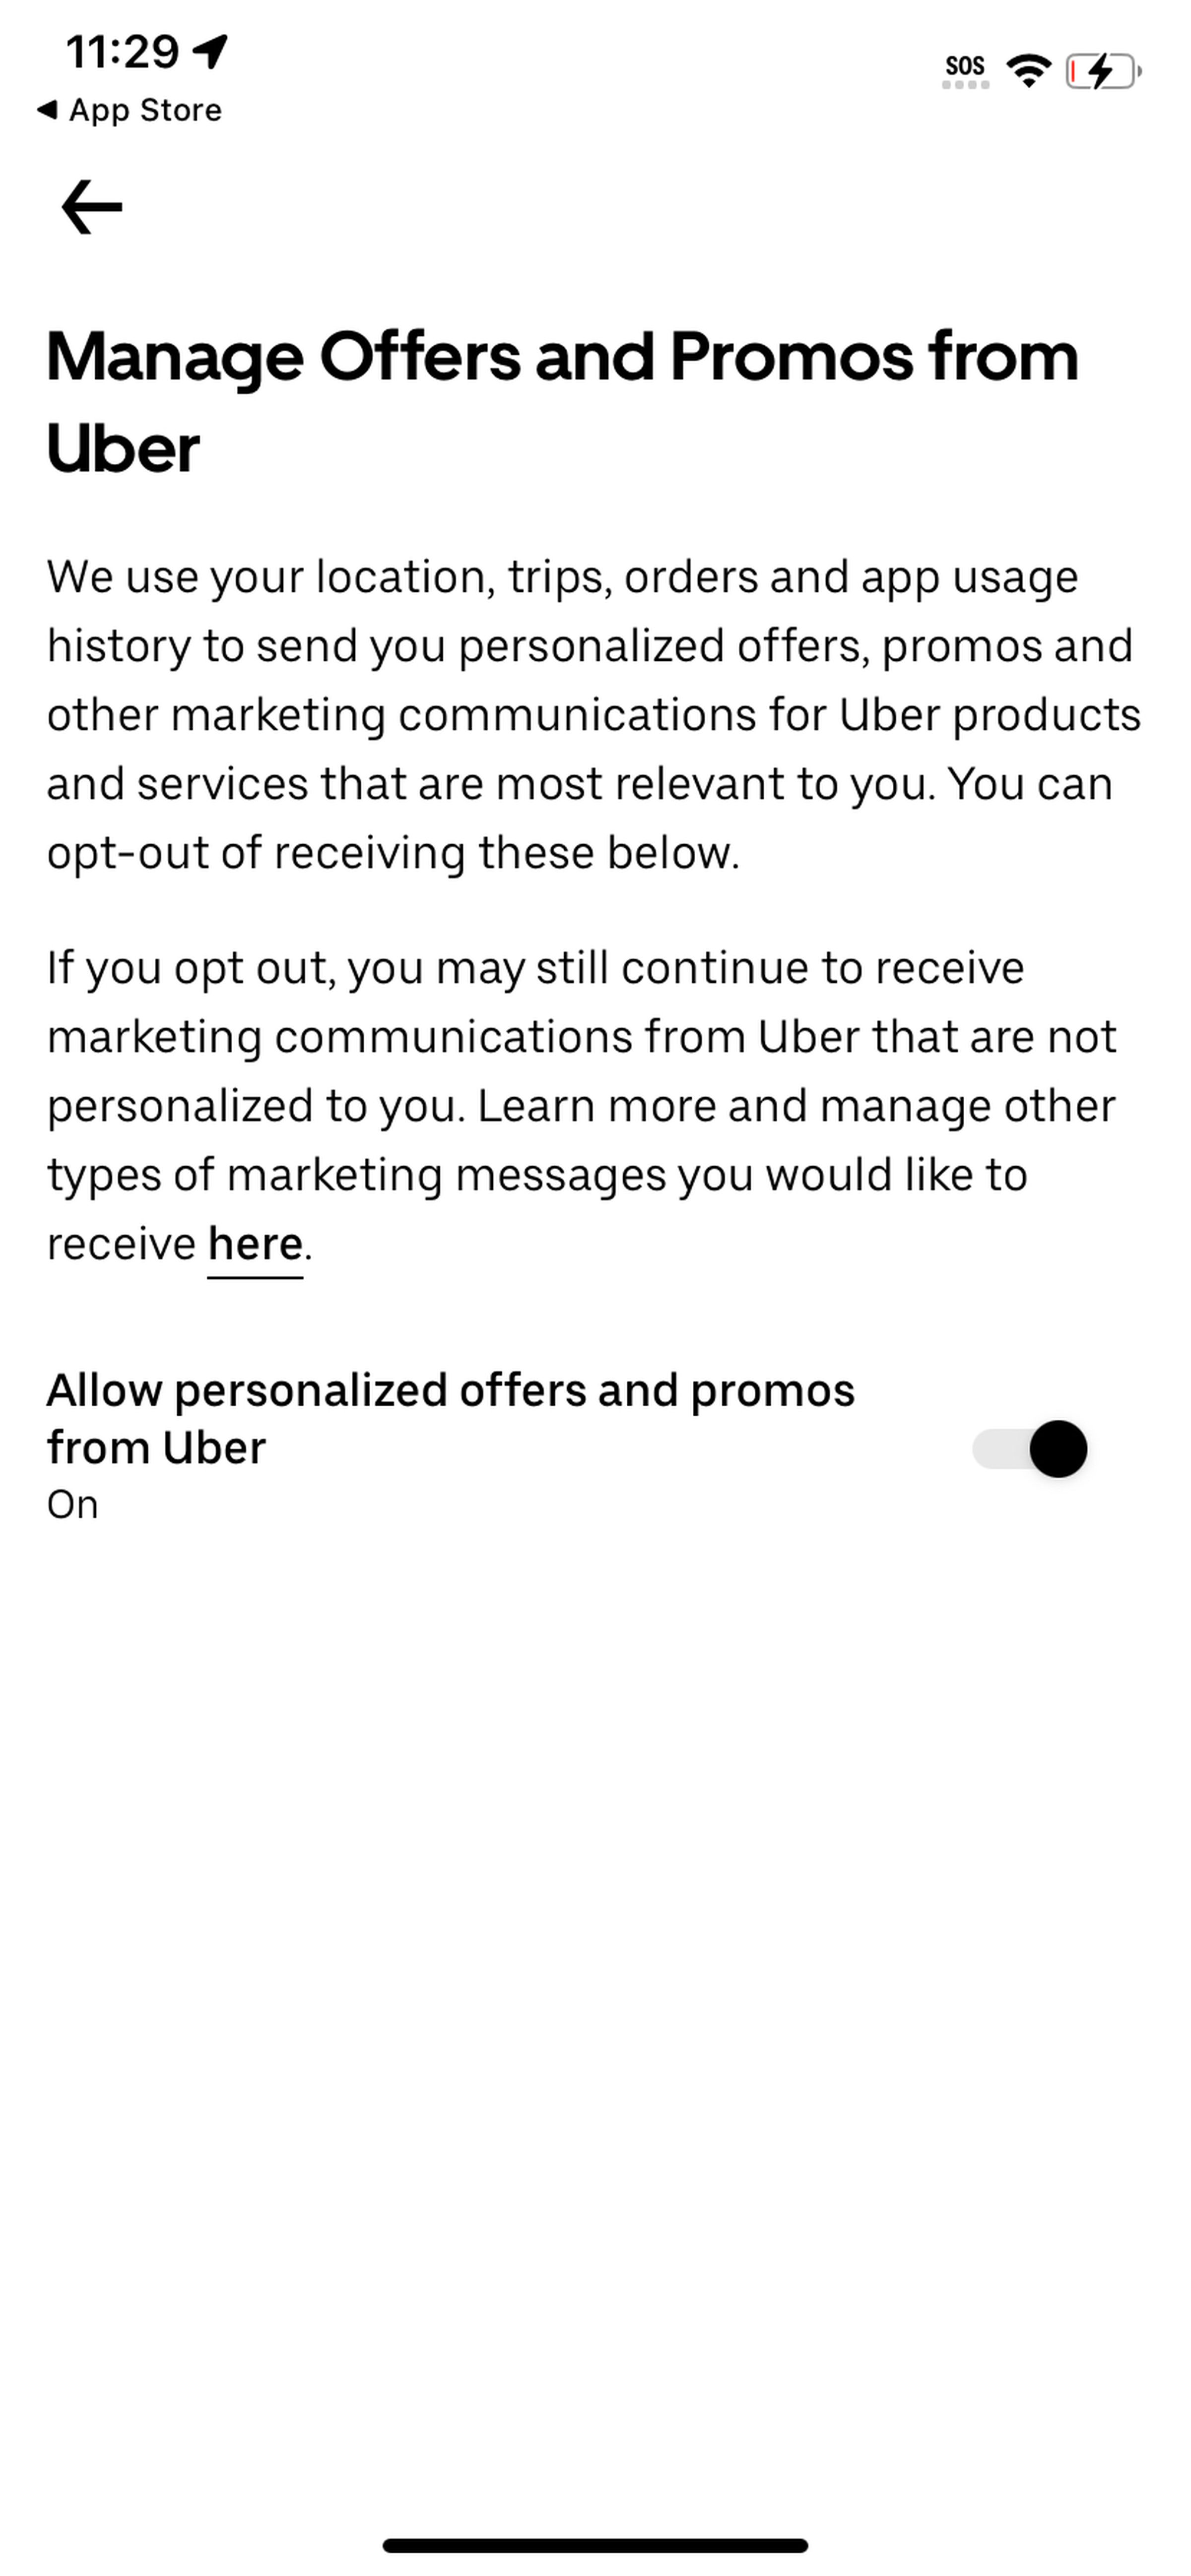 Page saying Manage Offers and Promos from Uber